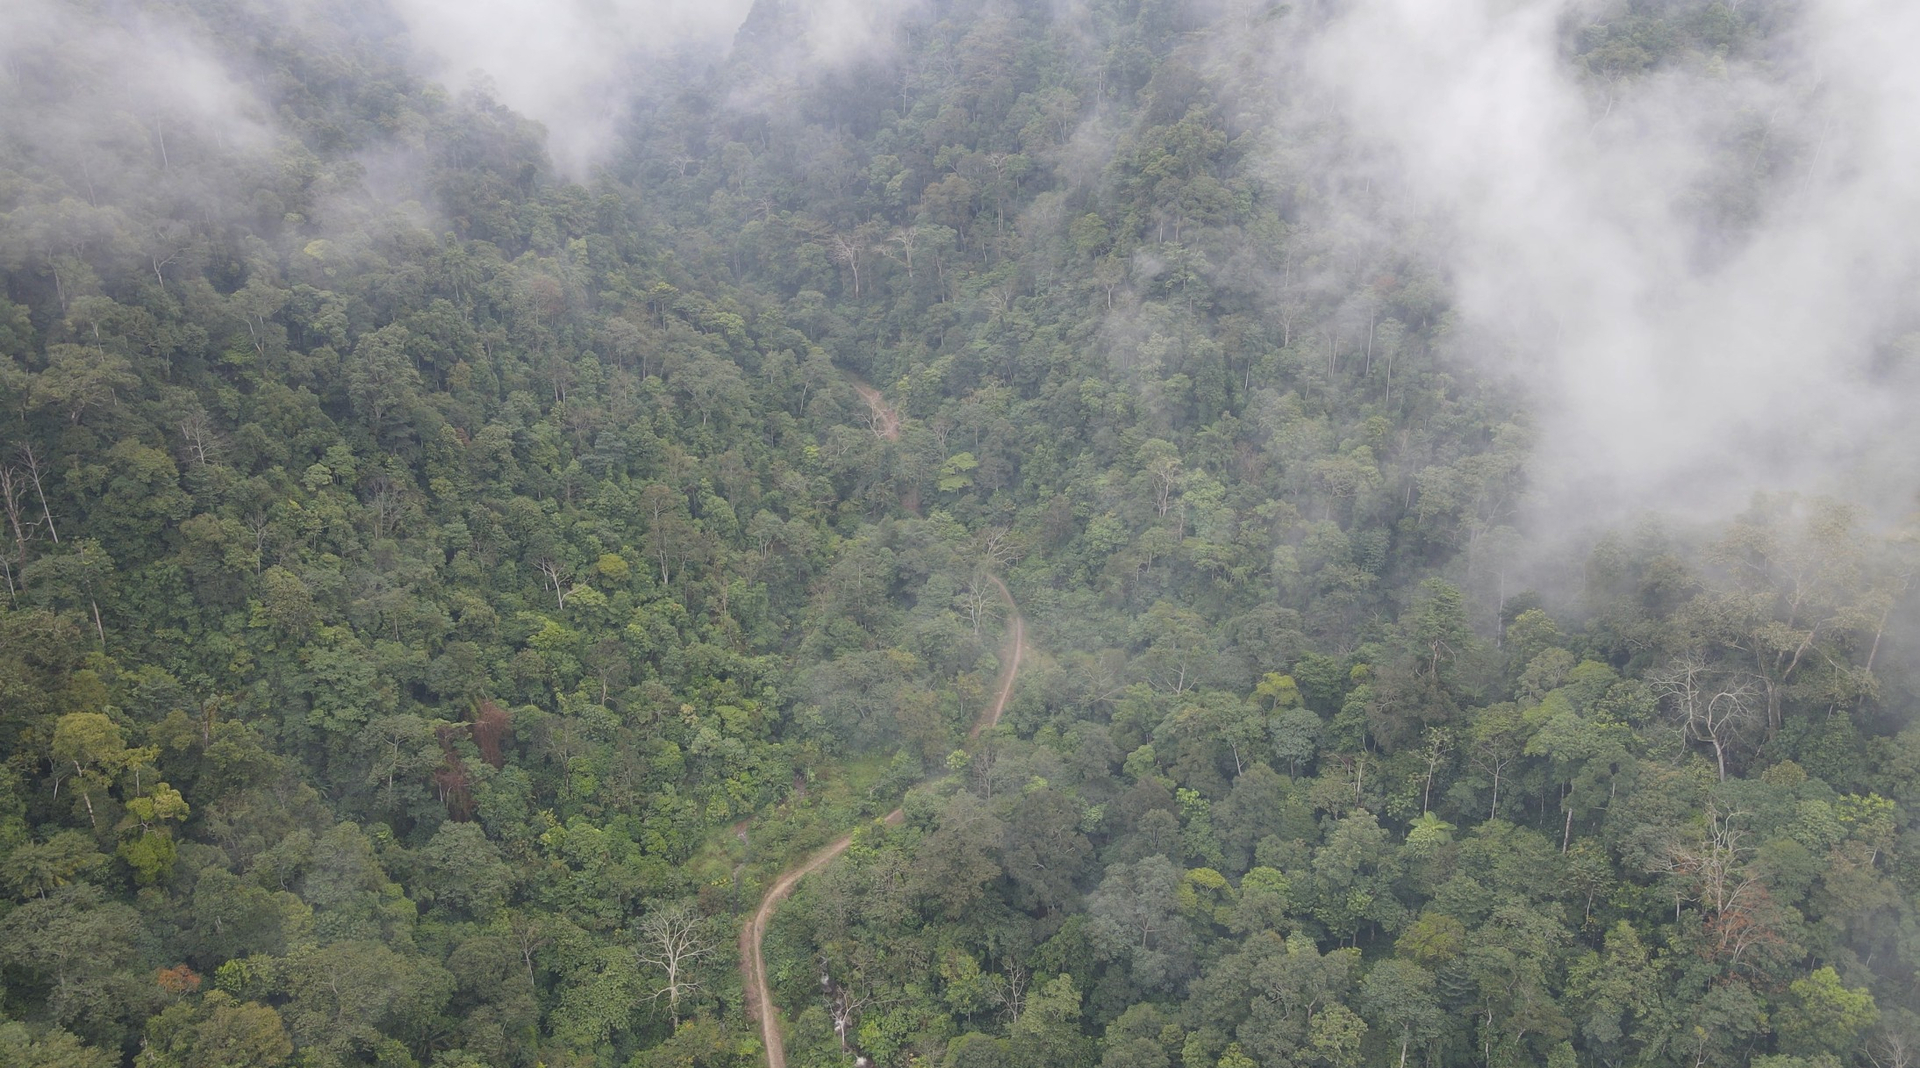 Forest development policies help promote green growth in agriculture. Photo: VAN.